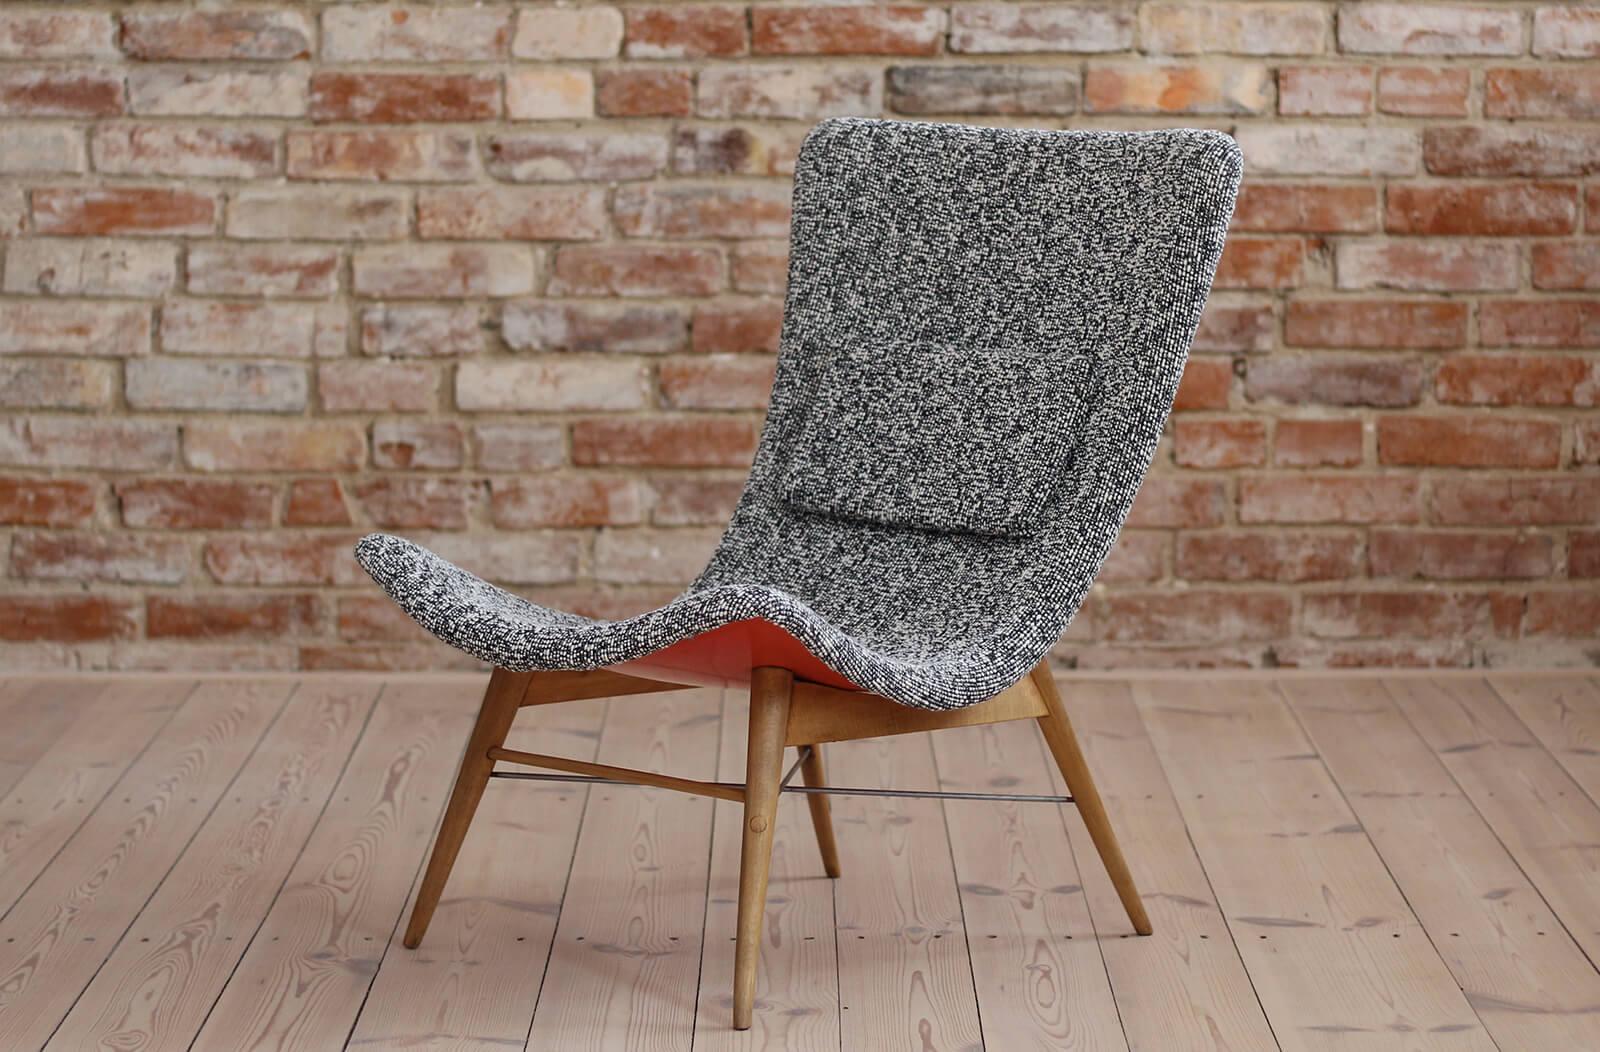 Lounge chair by Miroslav Navratil, manufactured in former Czechoslovakia by Cesky Nabytek, 1959. Original wooden base, fiberglass shell seating. The chair is newly upholstered with a high quality fabric from Sahco brand (41% cotton 30% polyacrylic